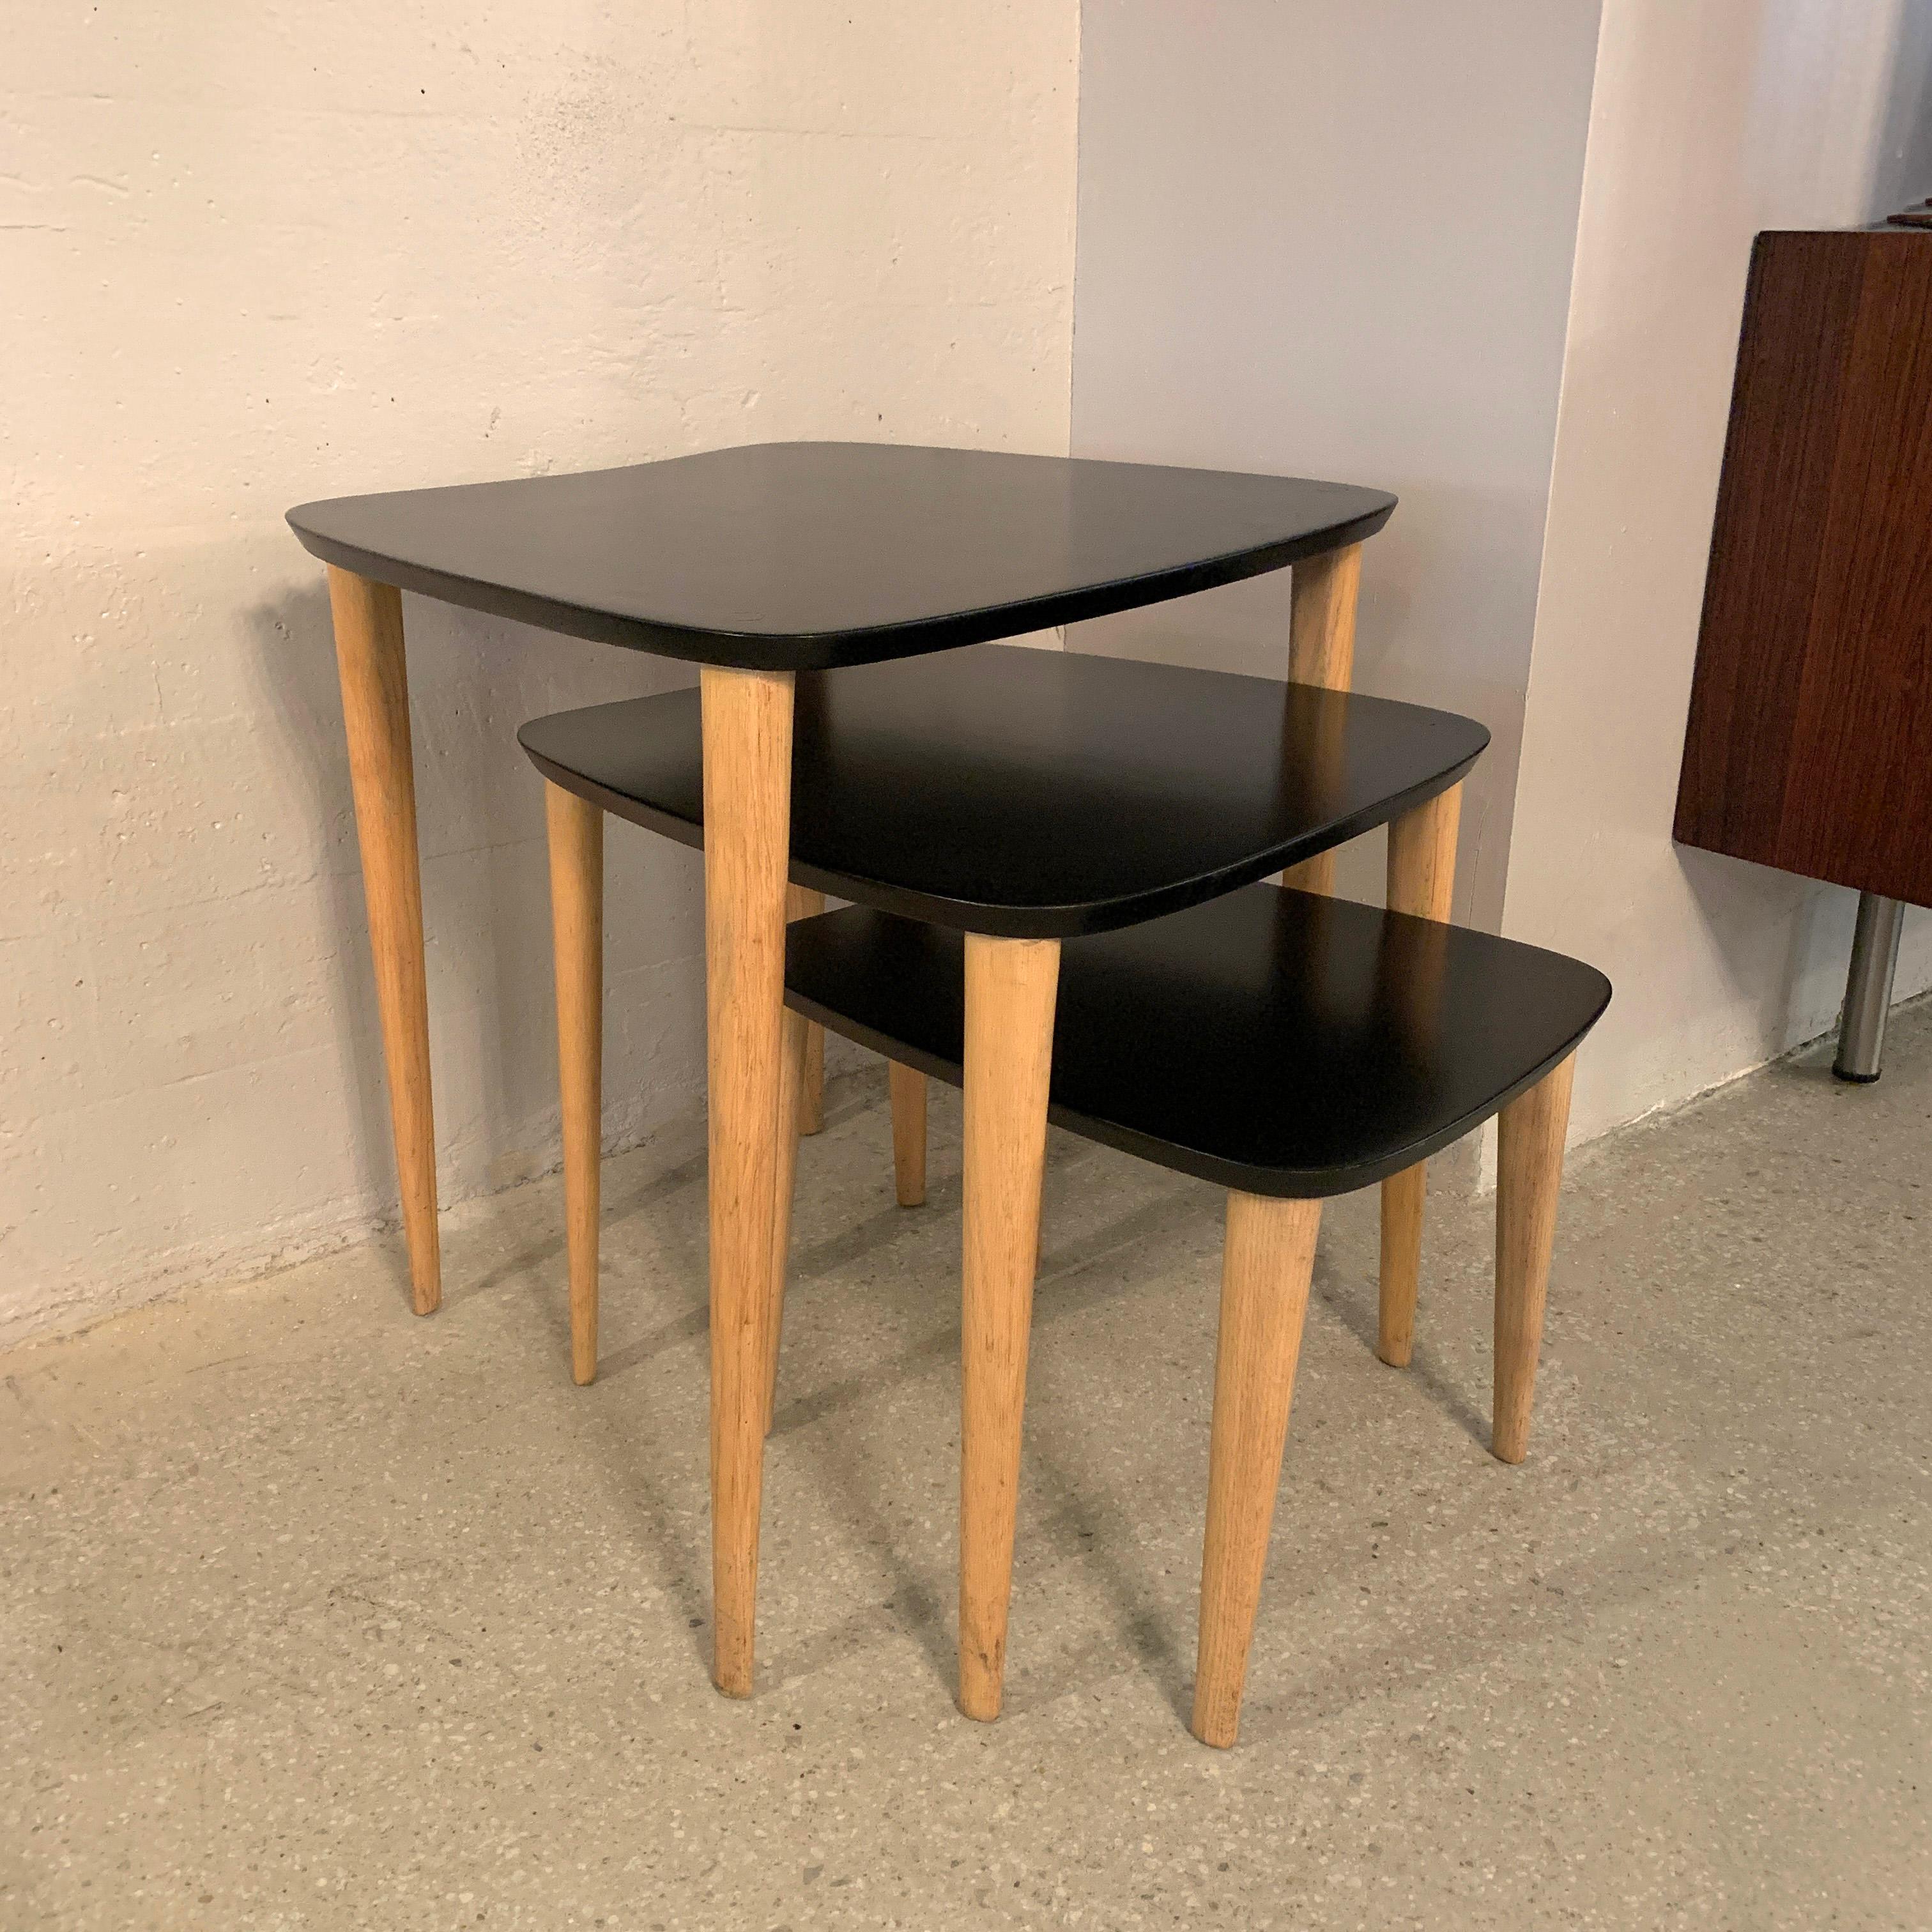 American Mid-Century Modern Black Lacquered Biomorphic Nesting Tables For Sale